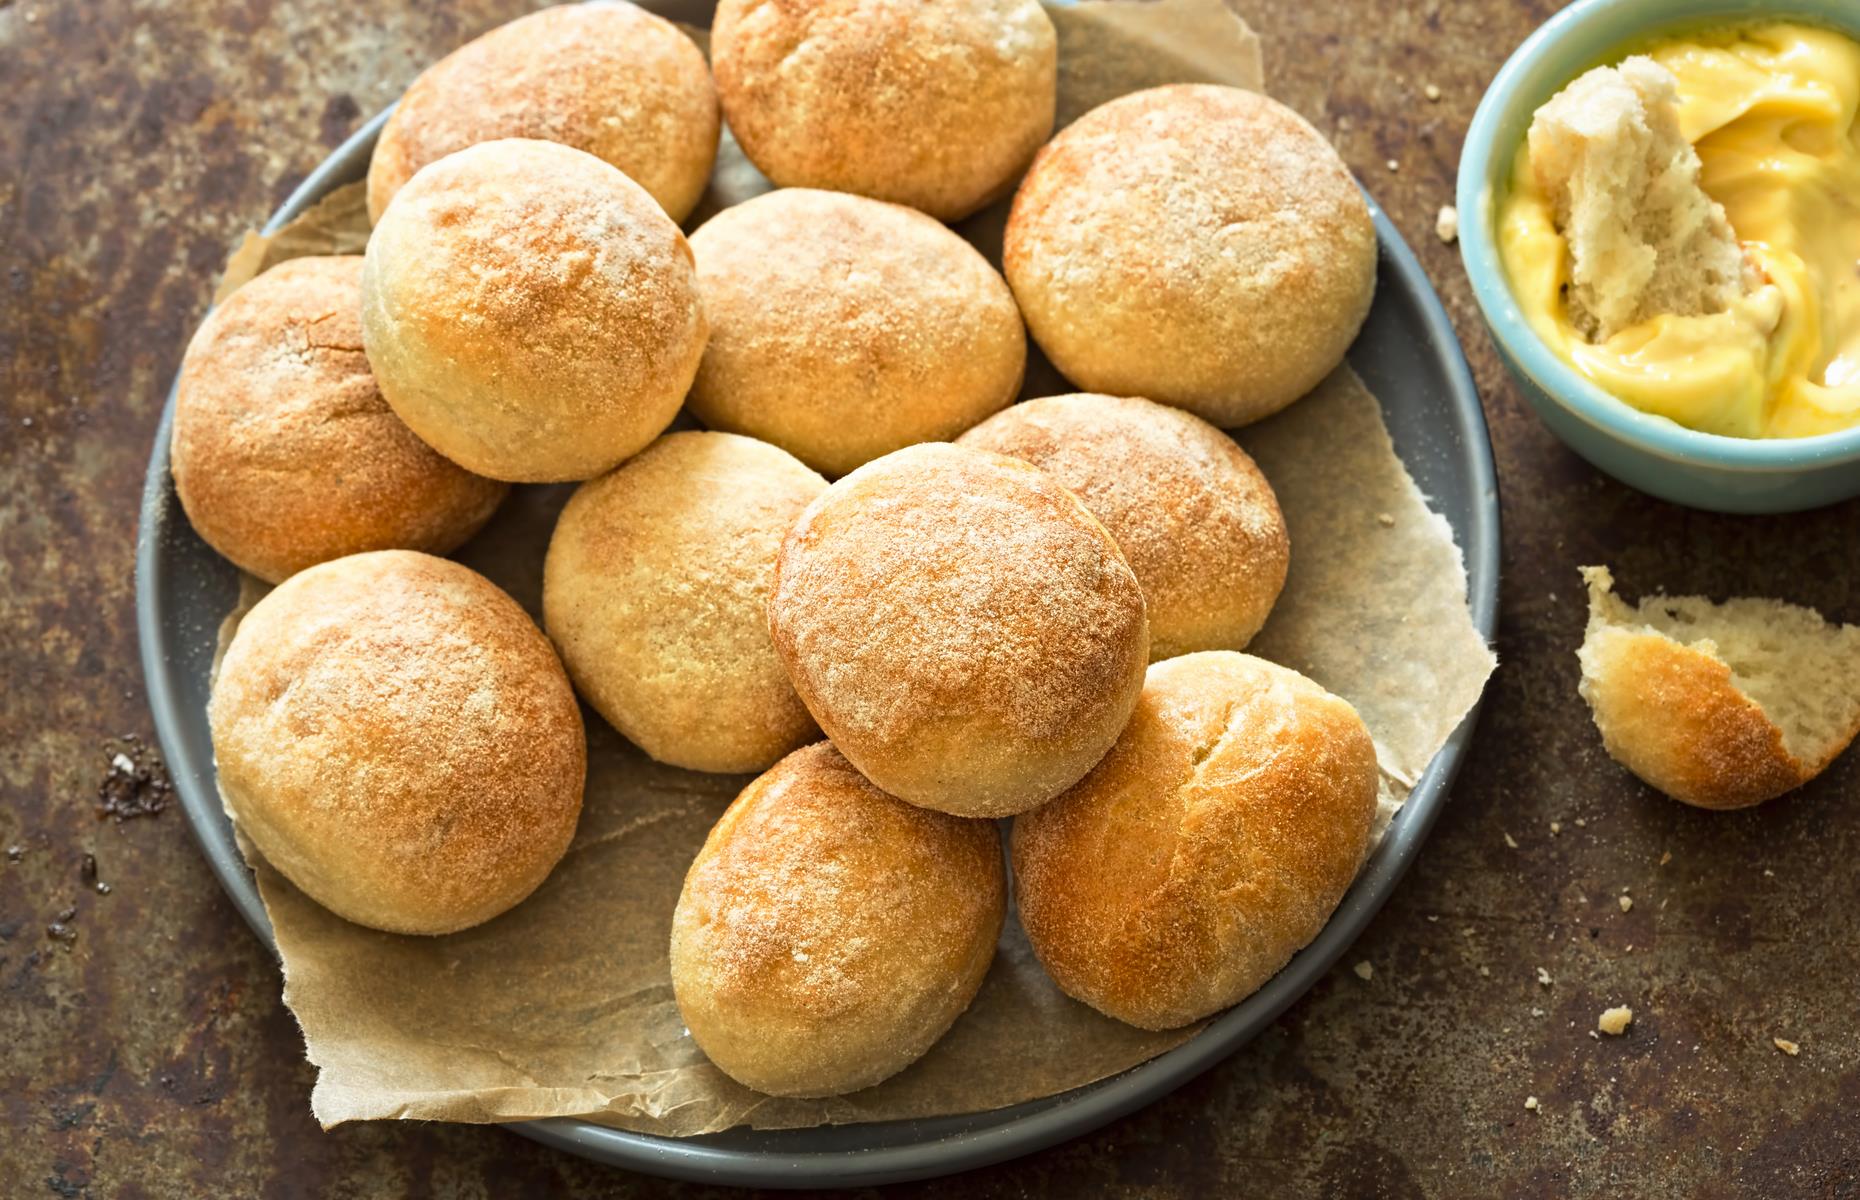 <p>Served warm from the oven with a bowl of garlic butter for dunking, these crisp little rolls are utterly irresistible. The method is simple; the dough balls require just one 30-minute rise, meaning this a great recipe for getting kids involved (they’ll adore eating the results, too).</p>  <p><a href="https://www.lovefood.com/recipes/60459/lawrence-dallaglios-doughballs"><strong>Get the recipe for dough balls with garlic butter here</strong></a></p>